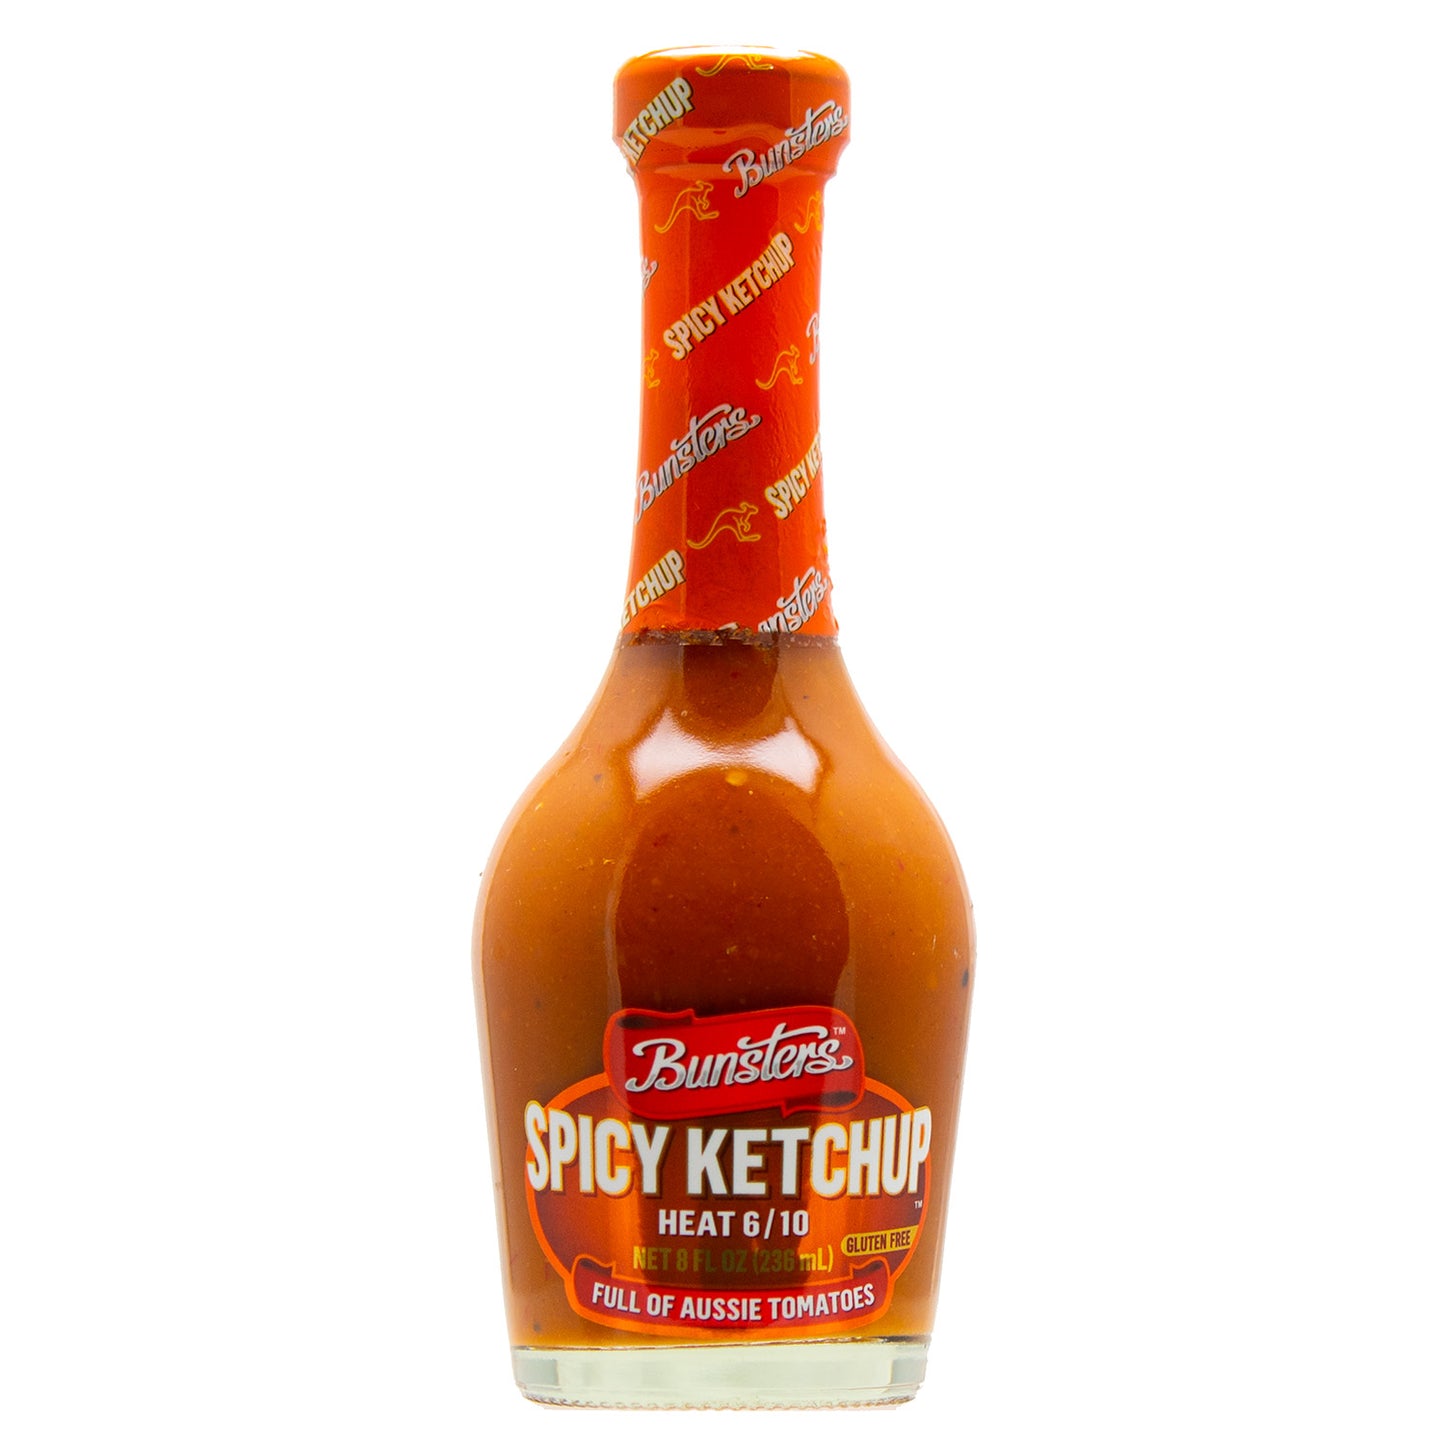 Bunsters Spicy Ketchup